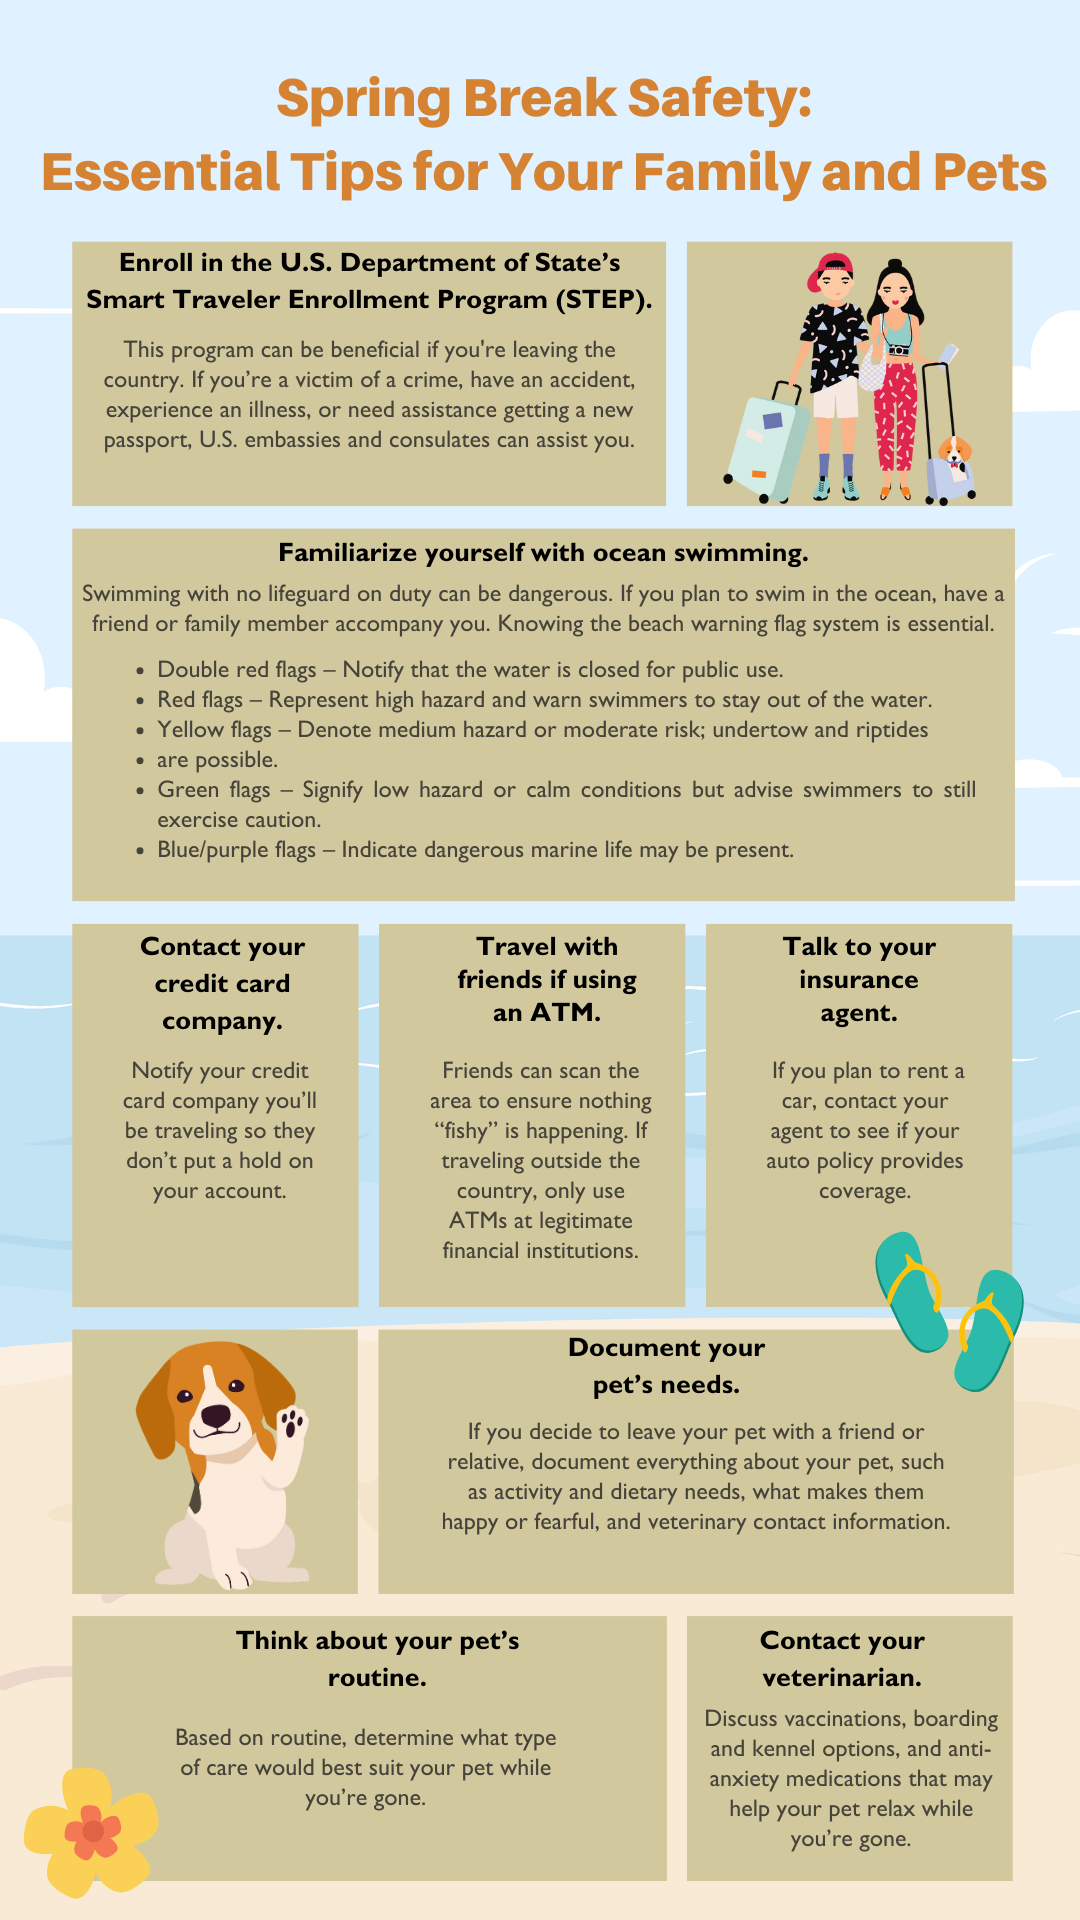 Spring Break Safety Essential Tips for Your Family and Pets INFOGRAPHIC photo